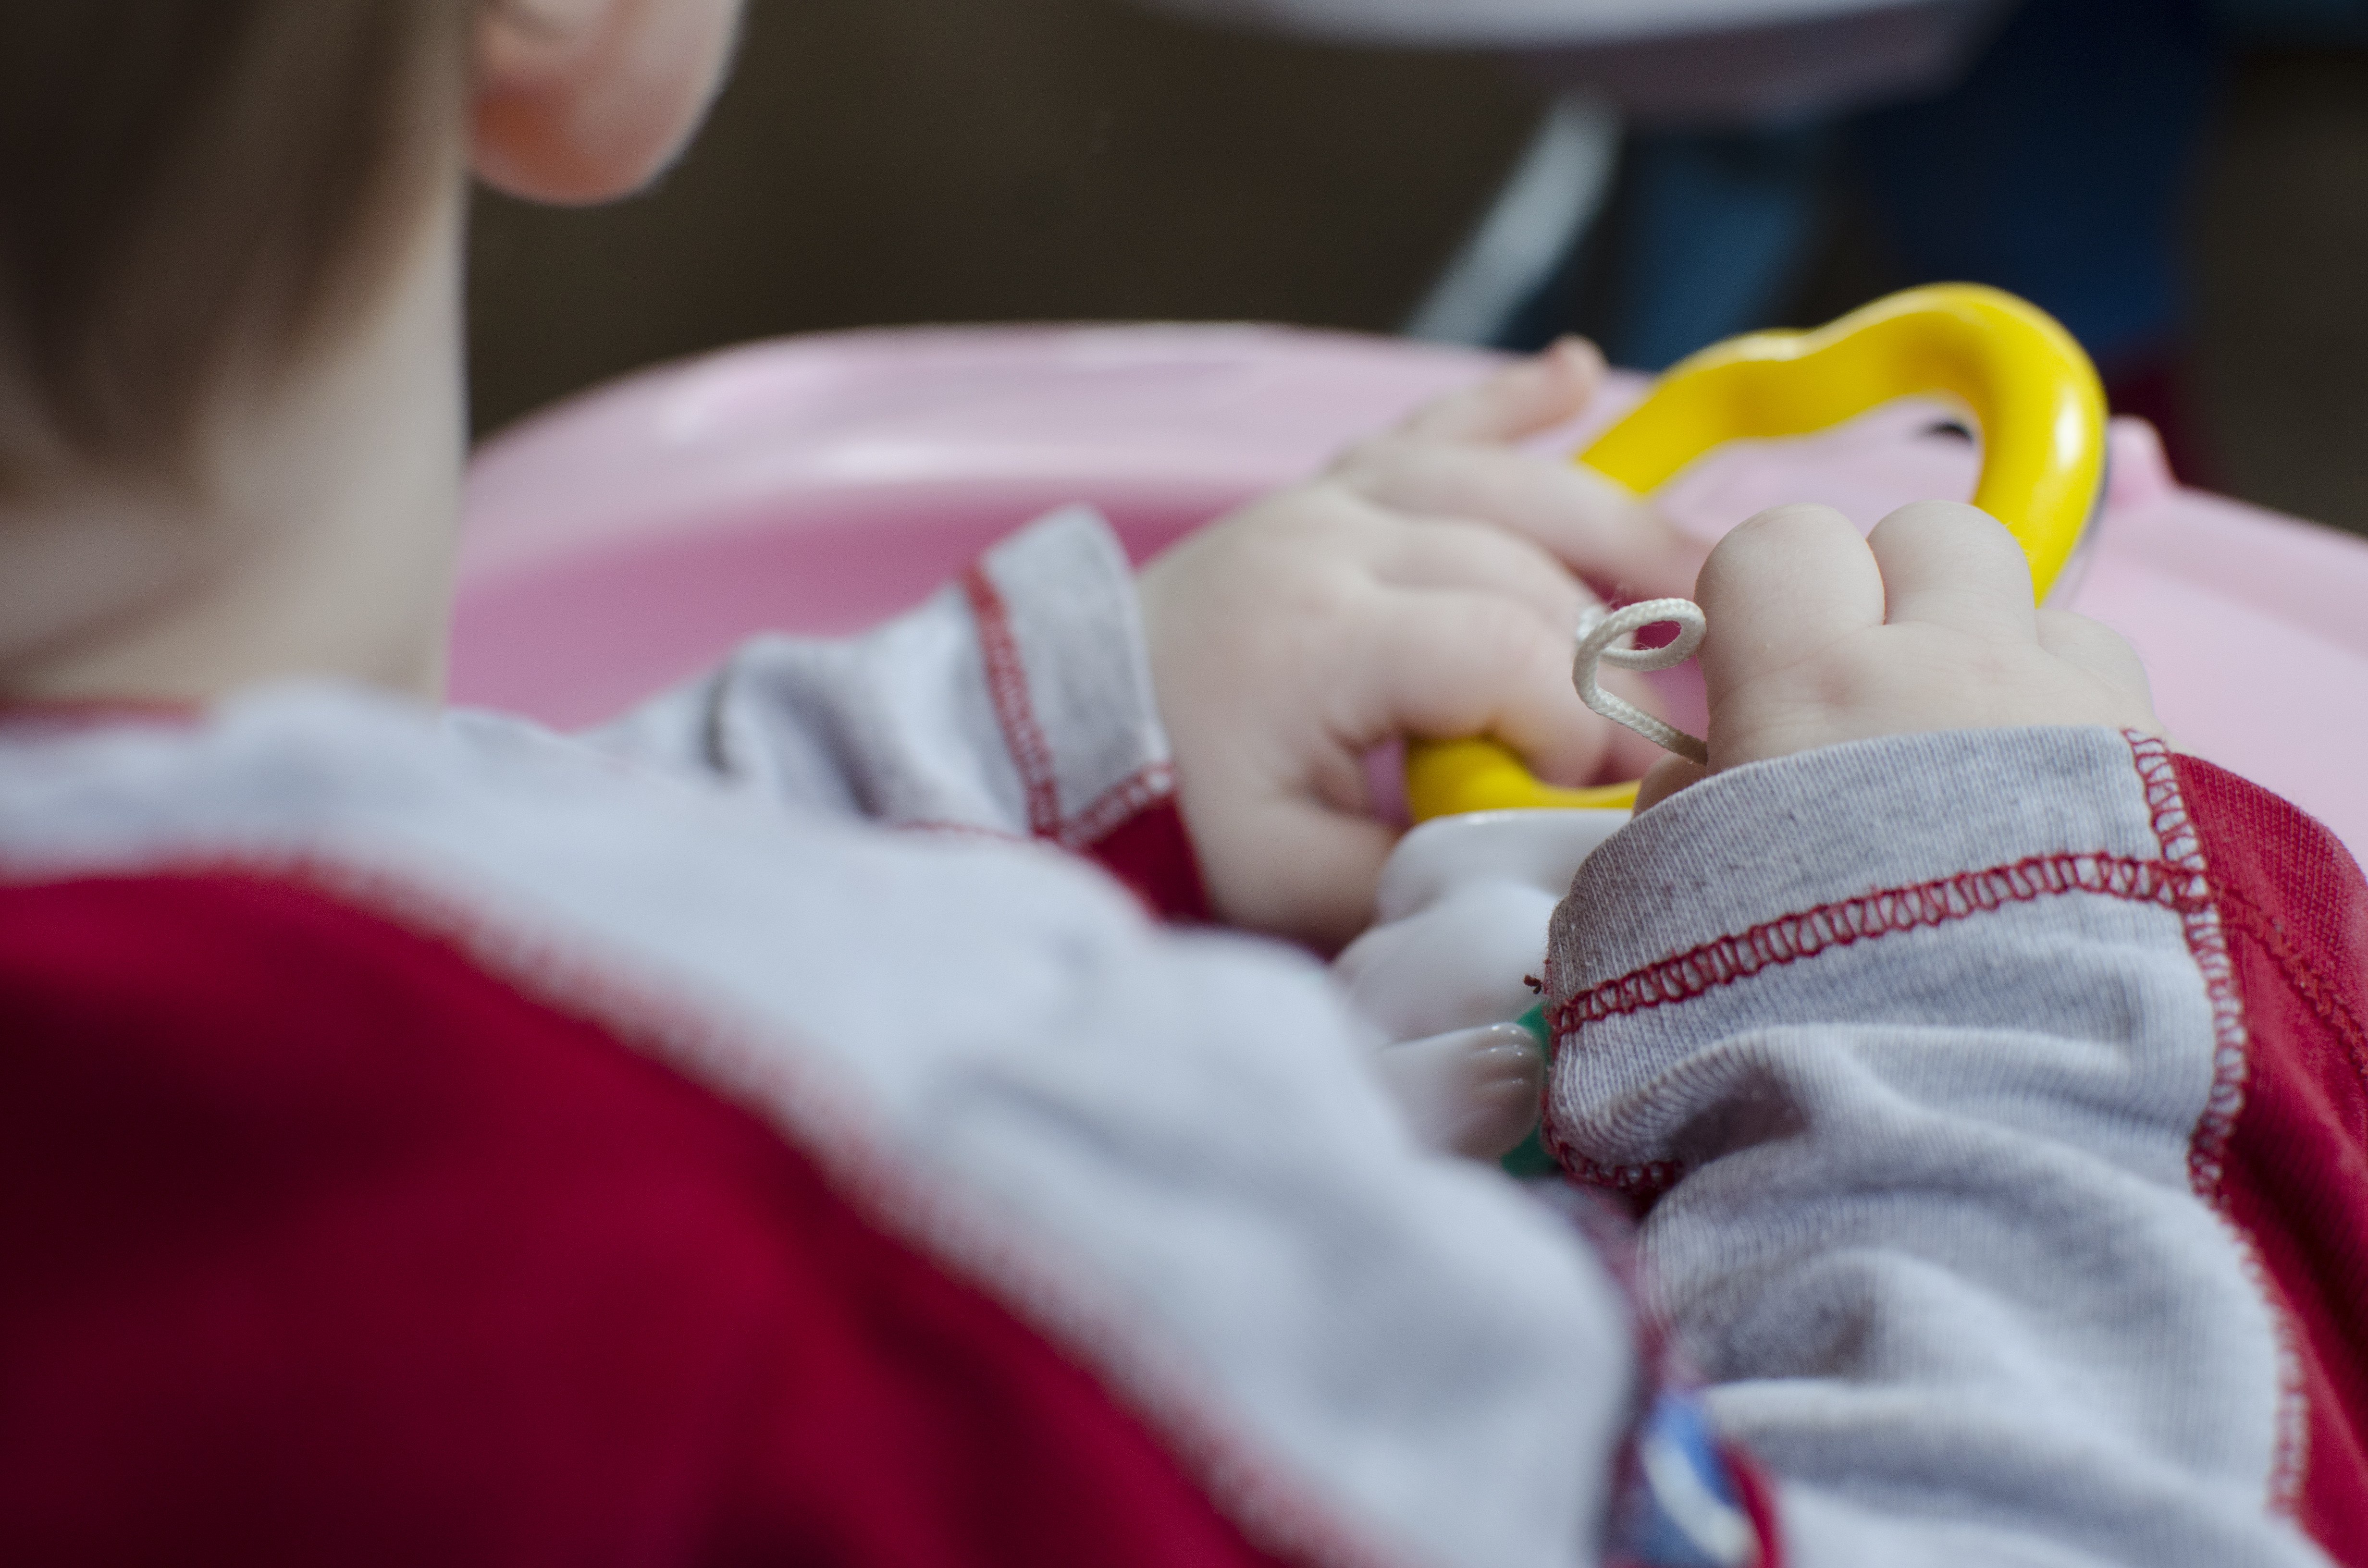 One of the babies cared for at the baby center in Pristina. Photo: Katerina Ilievska